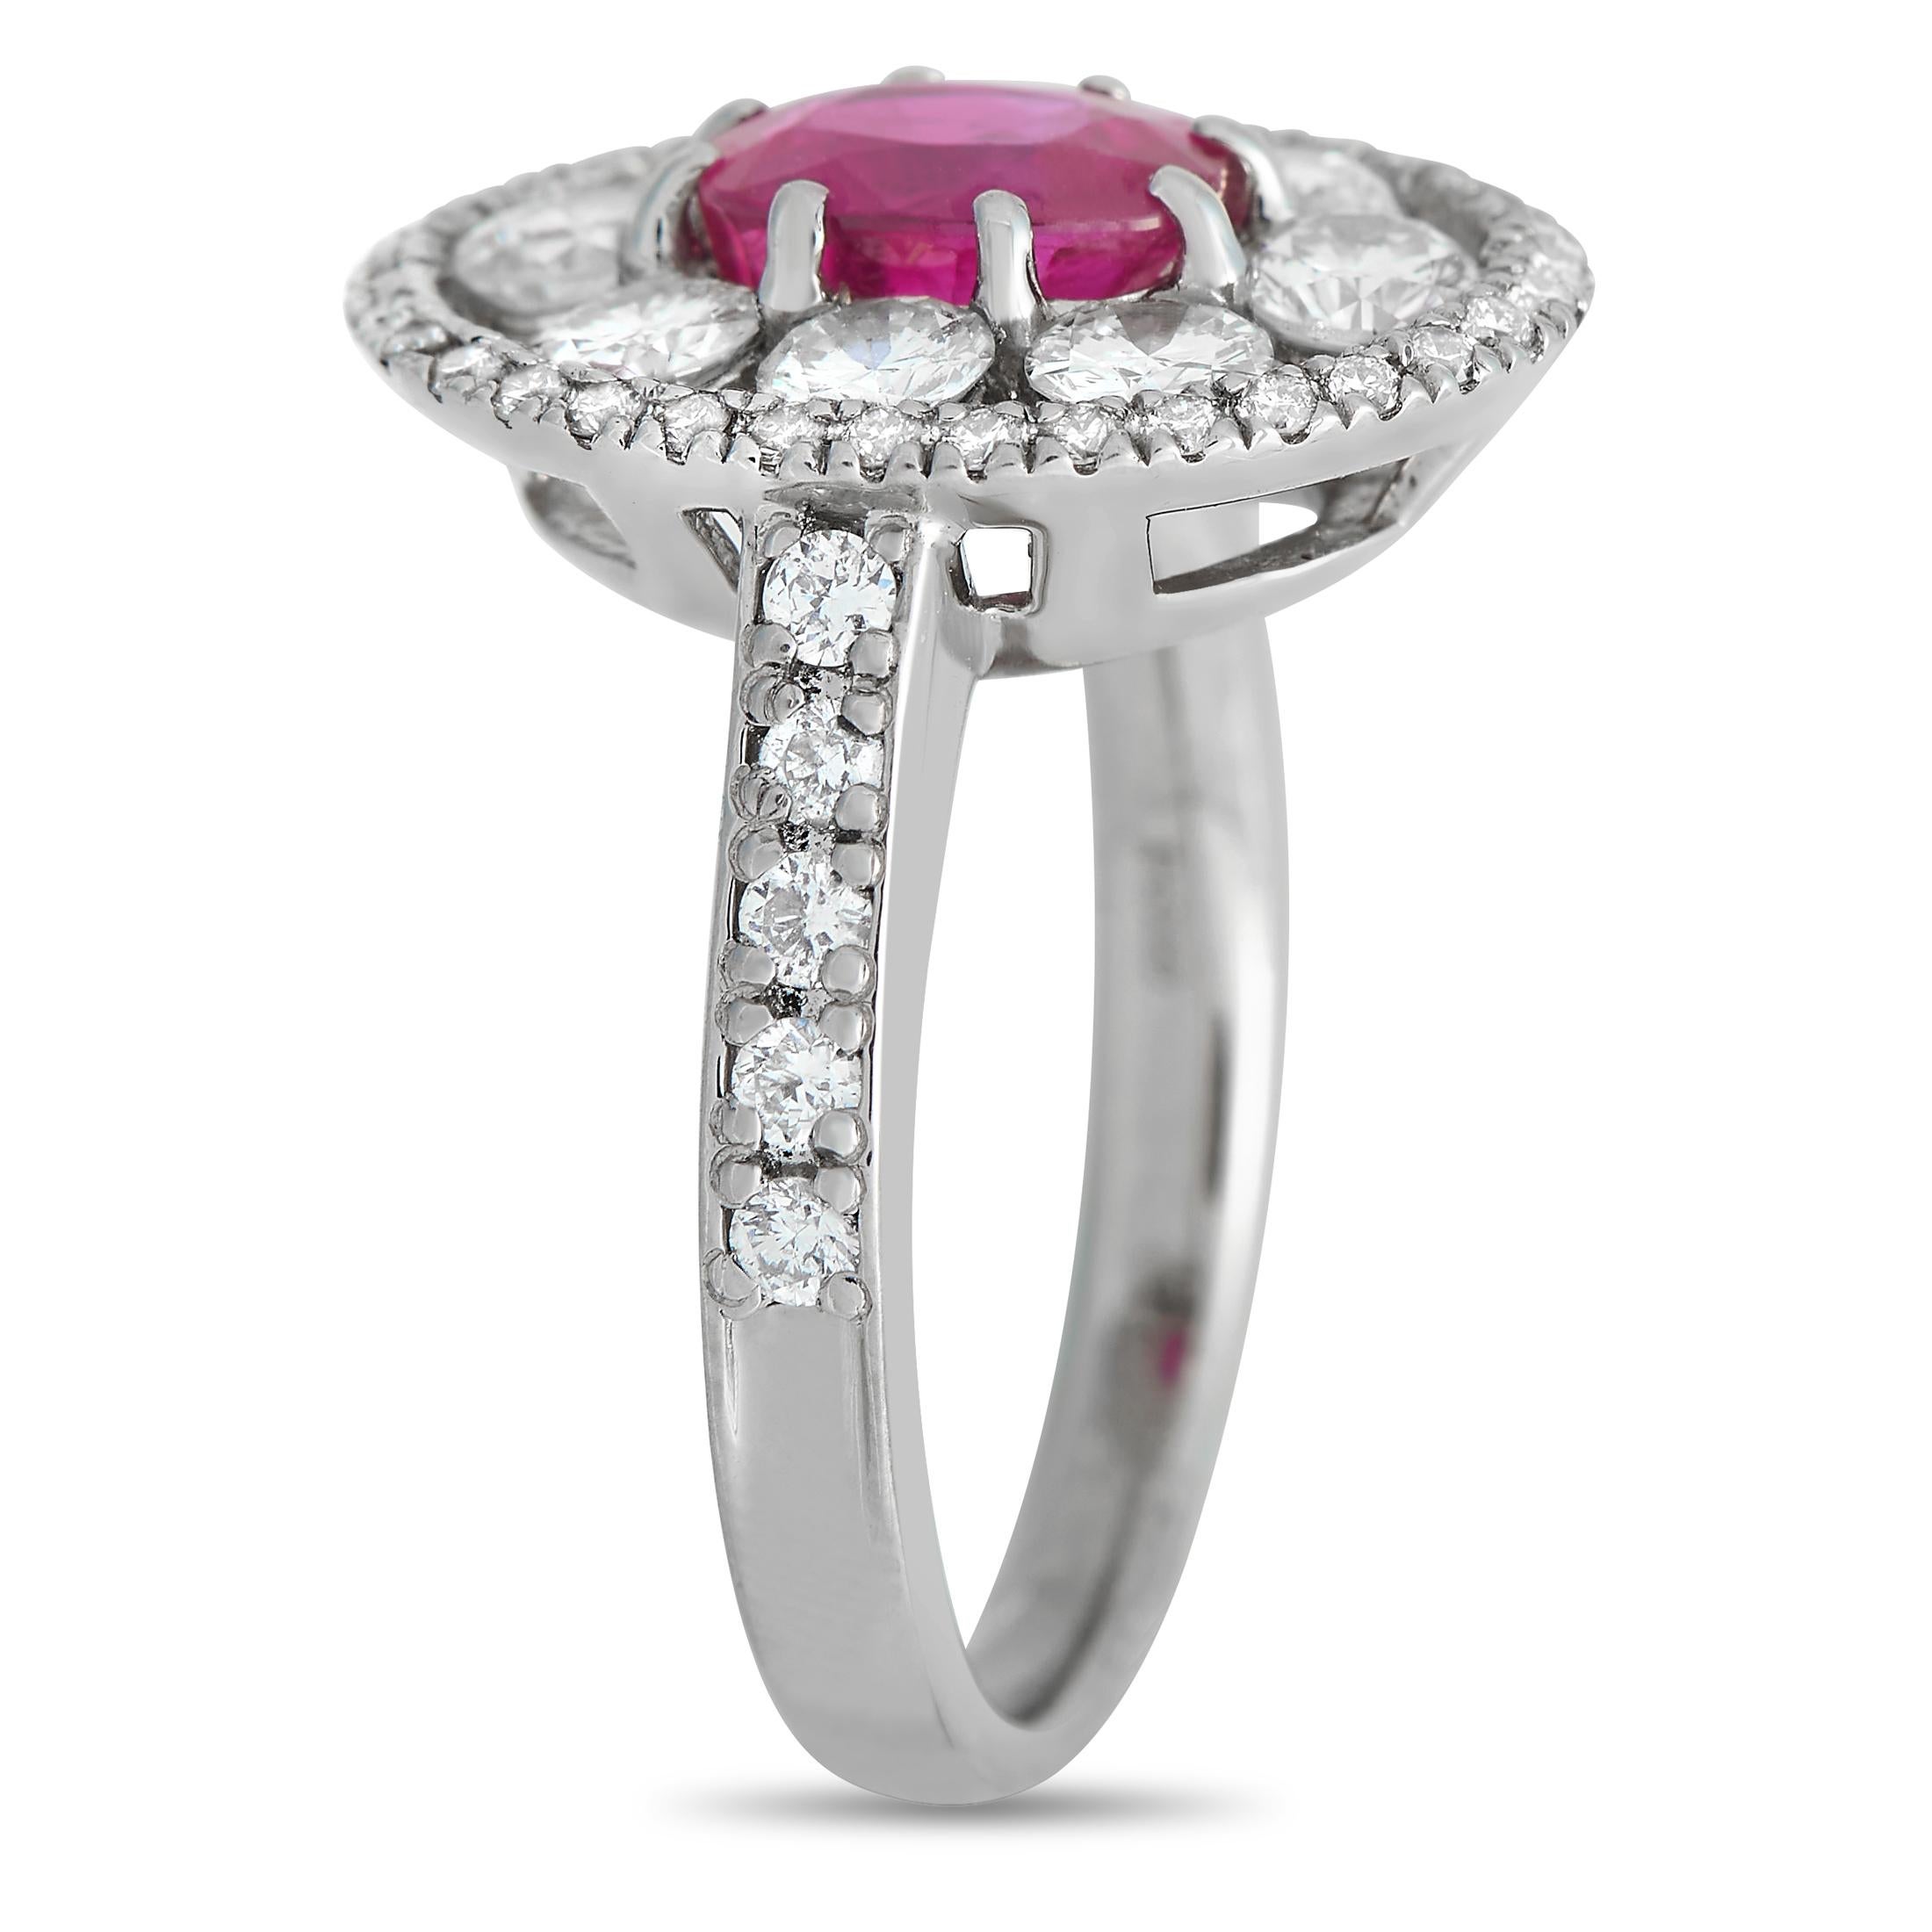 Bold, radiant, and incredibly impressible, this platinum ring is designed to make a statement. The dazzling 1.38 carat ruby center stone is elevated thanks to sparkling diamonds with a total weight of 1.33 carats. It features a 3mm wide band and a